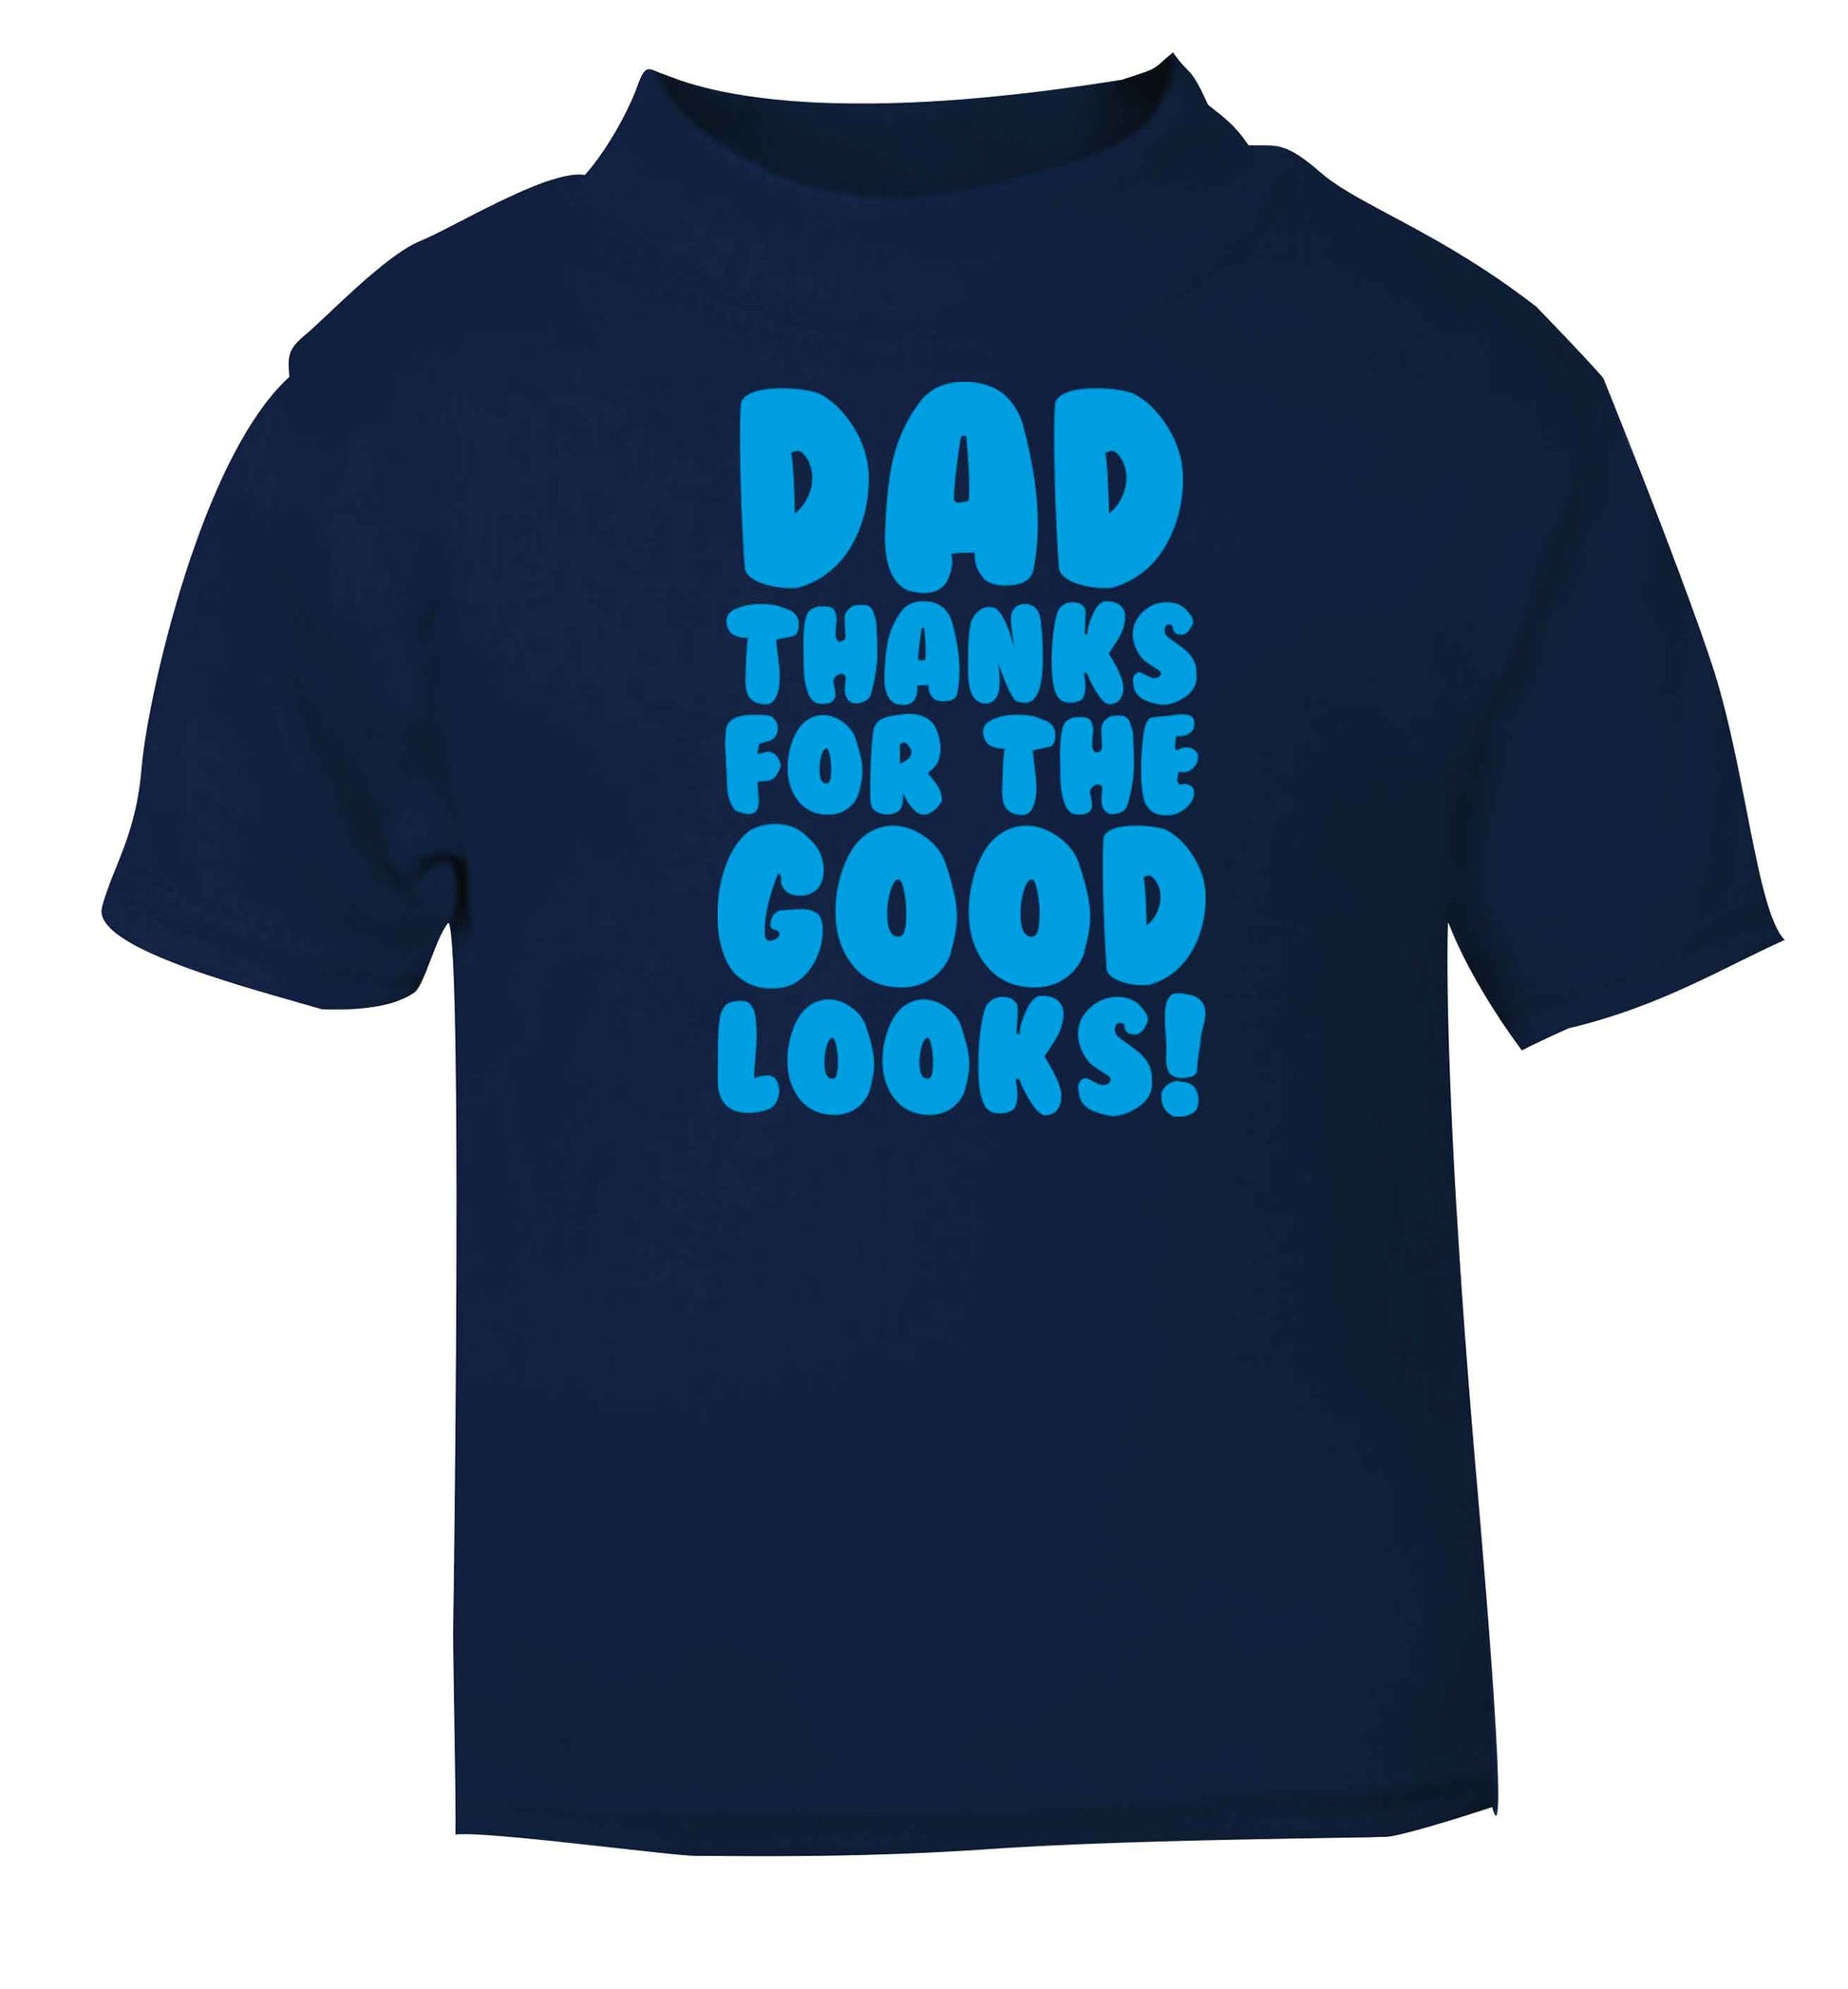 Dad thanks for the good looks navy baby toddler Tshirt 2 Years